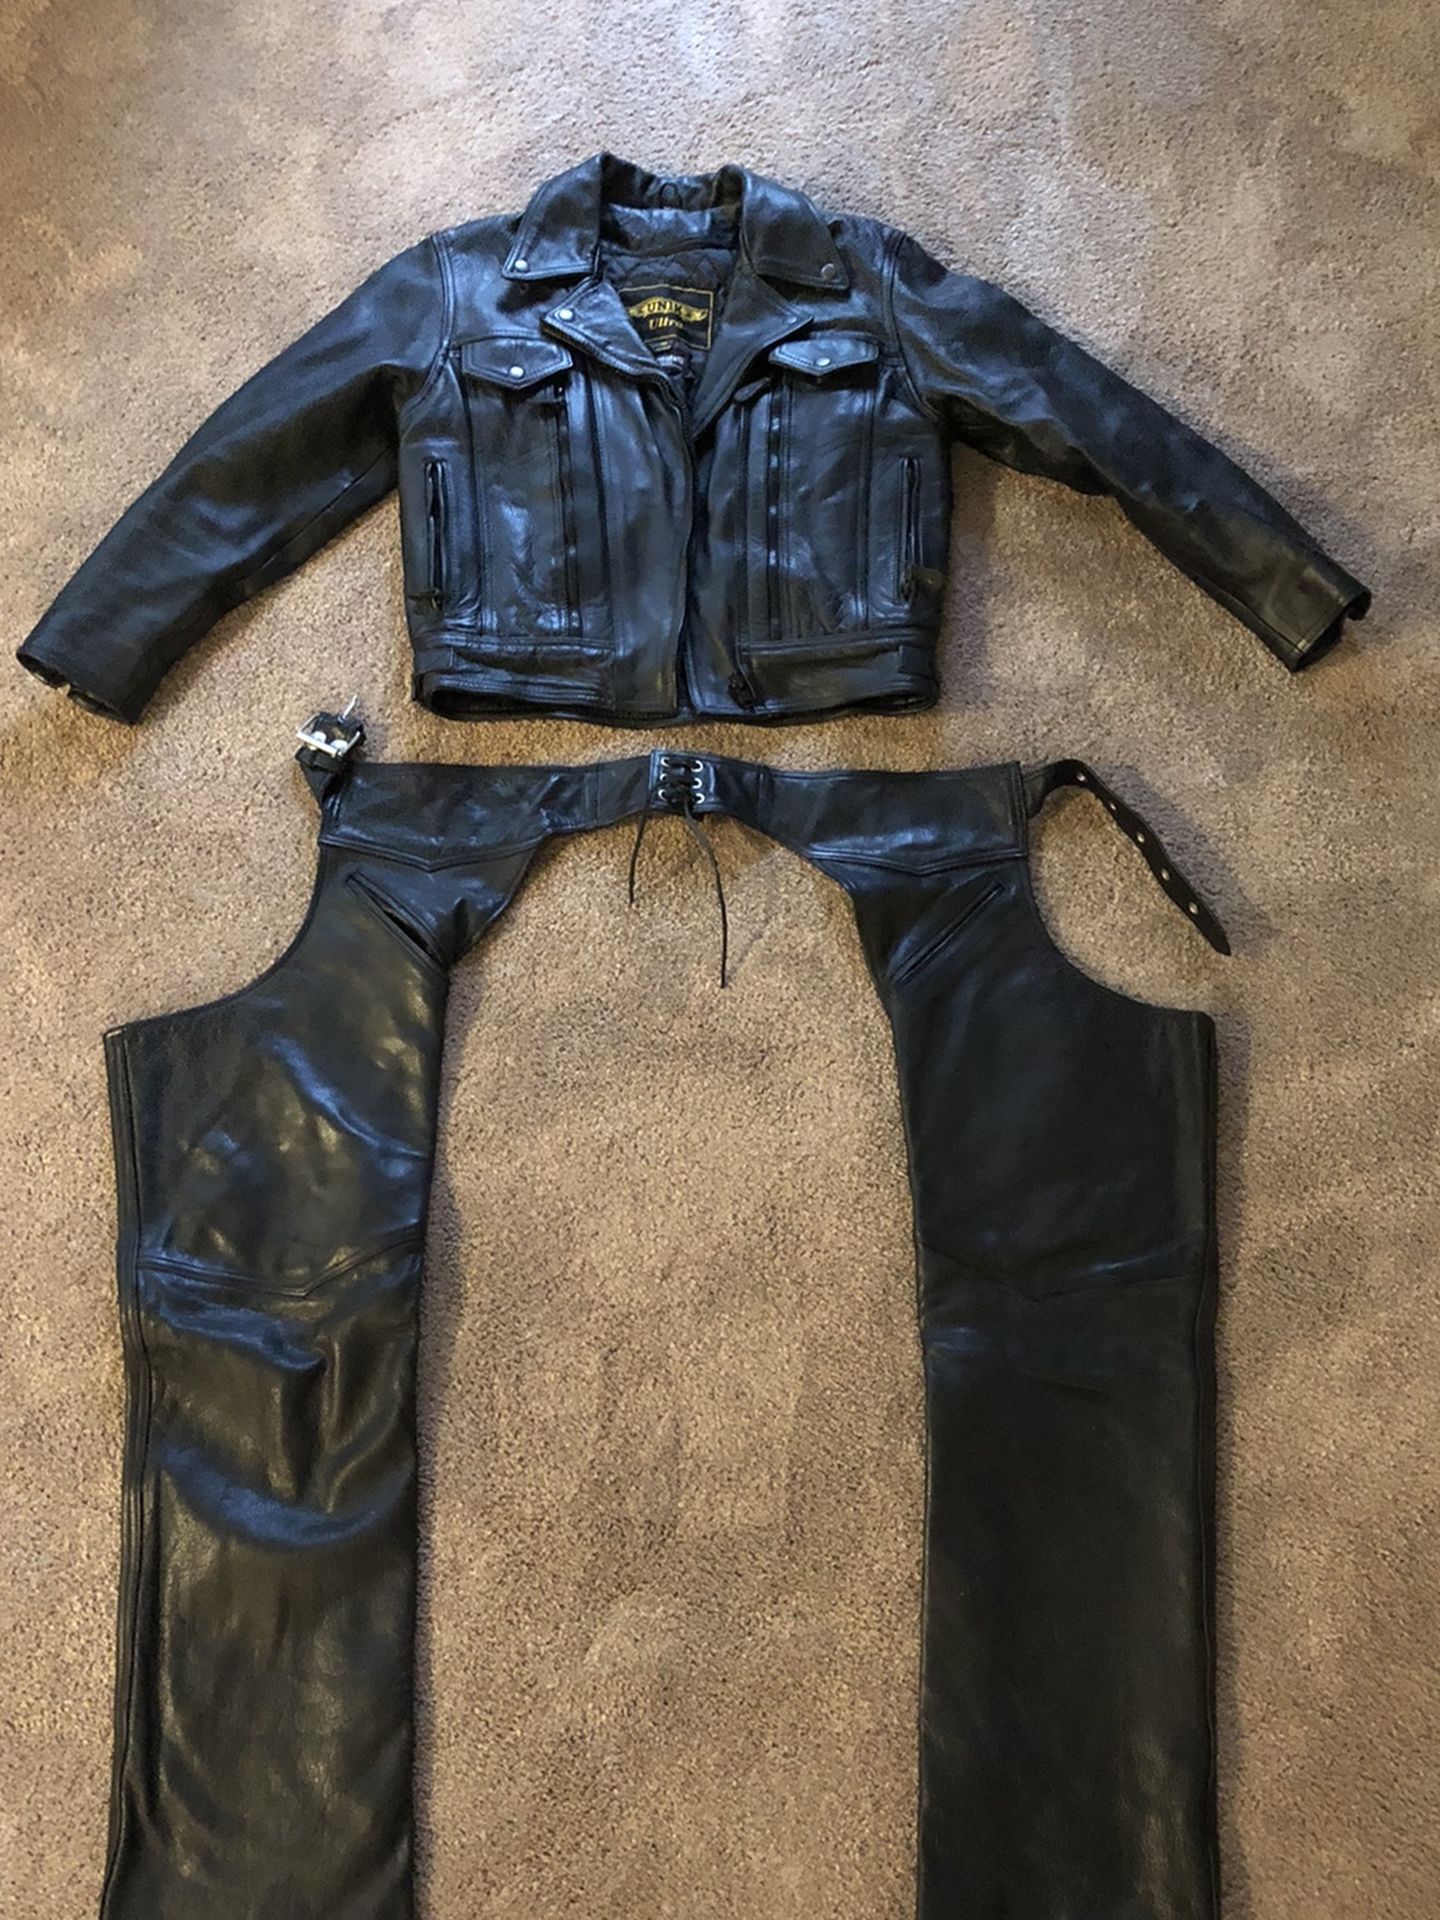 Women’s Motorcycle Riding Leather Jacket And Chaps